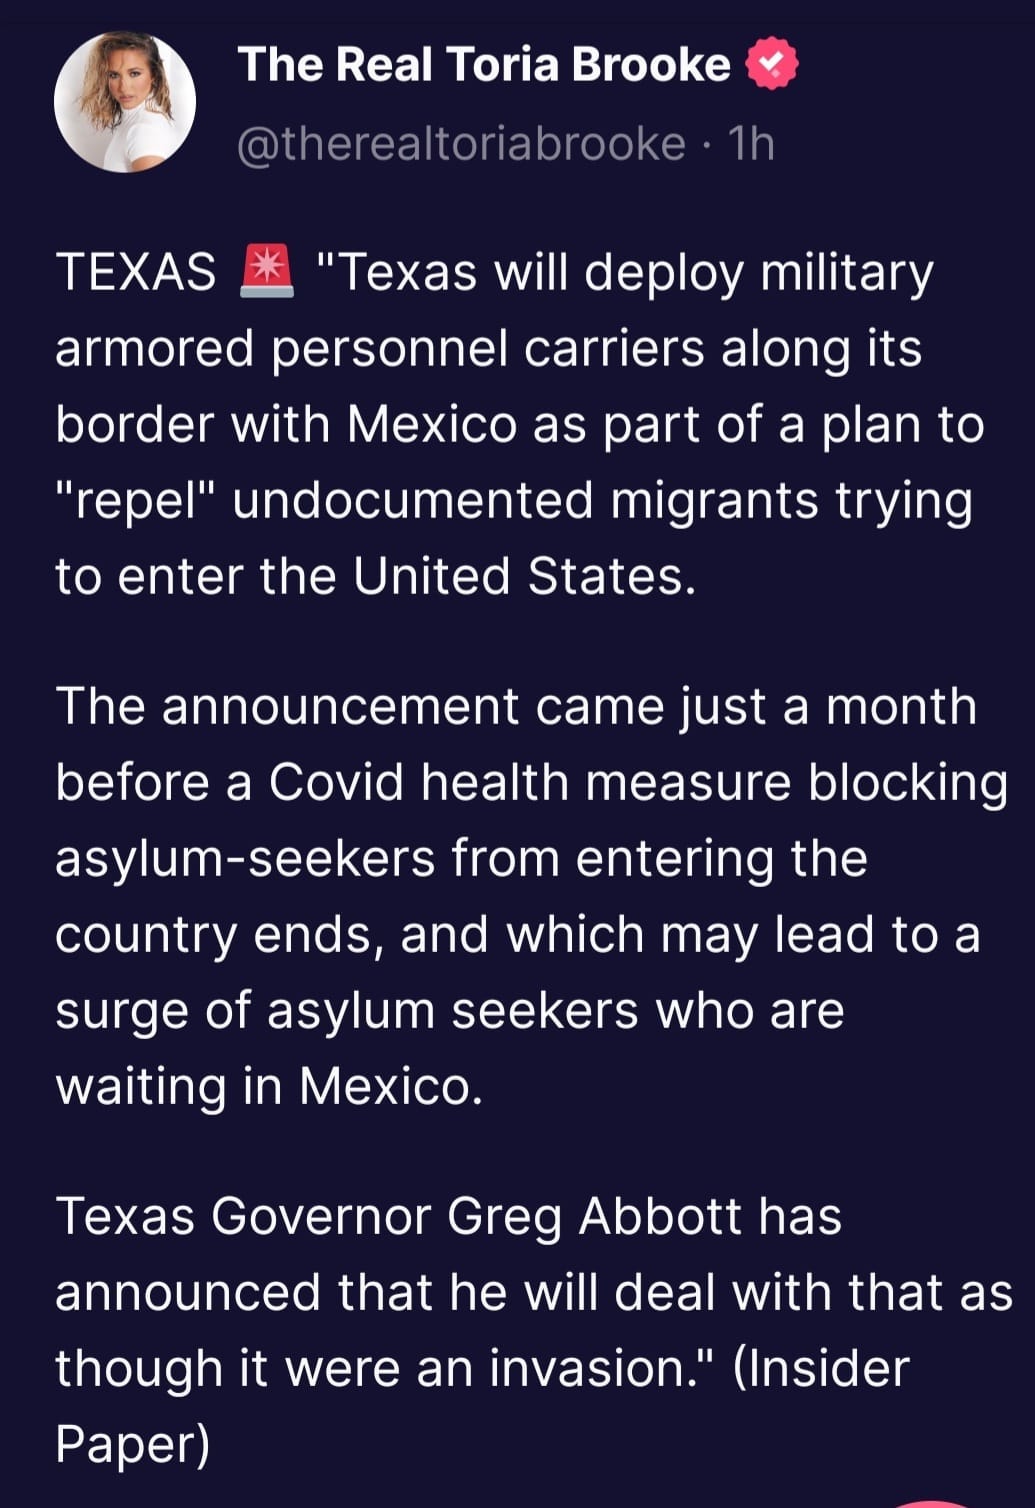 May be an image of 1 person and text that says 'The Real Toria Brooke @therealtoriabrooke 1h TEXAS "Texas will deploy military armored personnel carriers along its border with Mexico as part of a plan to "repel" undocumented migrants trying to enter the United States. The announcement came just a month before a Covid health measure blocking asylum-seekers from entering the country ends, and which may lead to a surge of asylum seekers who are waiting in Mexico. Texas Governor Greg Abbott has announced that he will deal with that as though it were an invasion." (Insider Paper)'